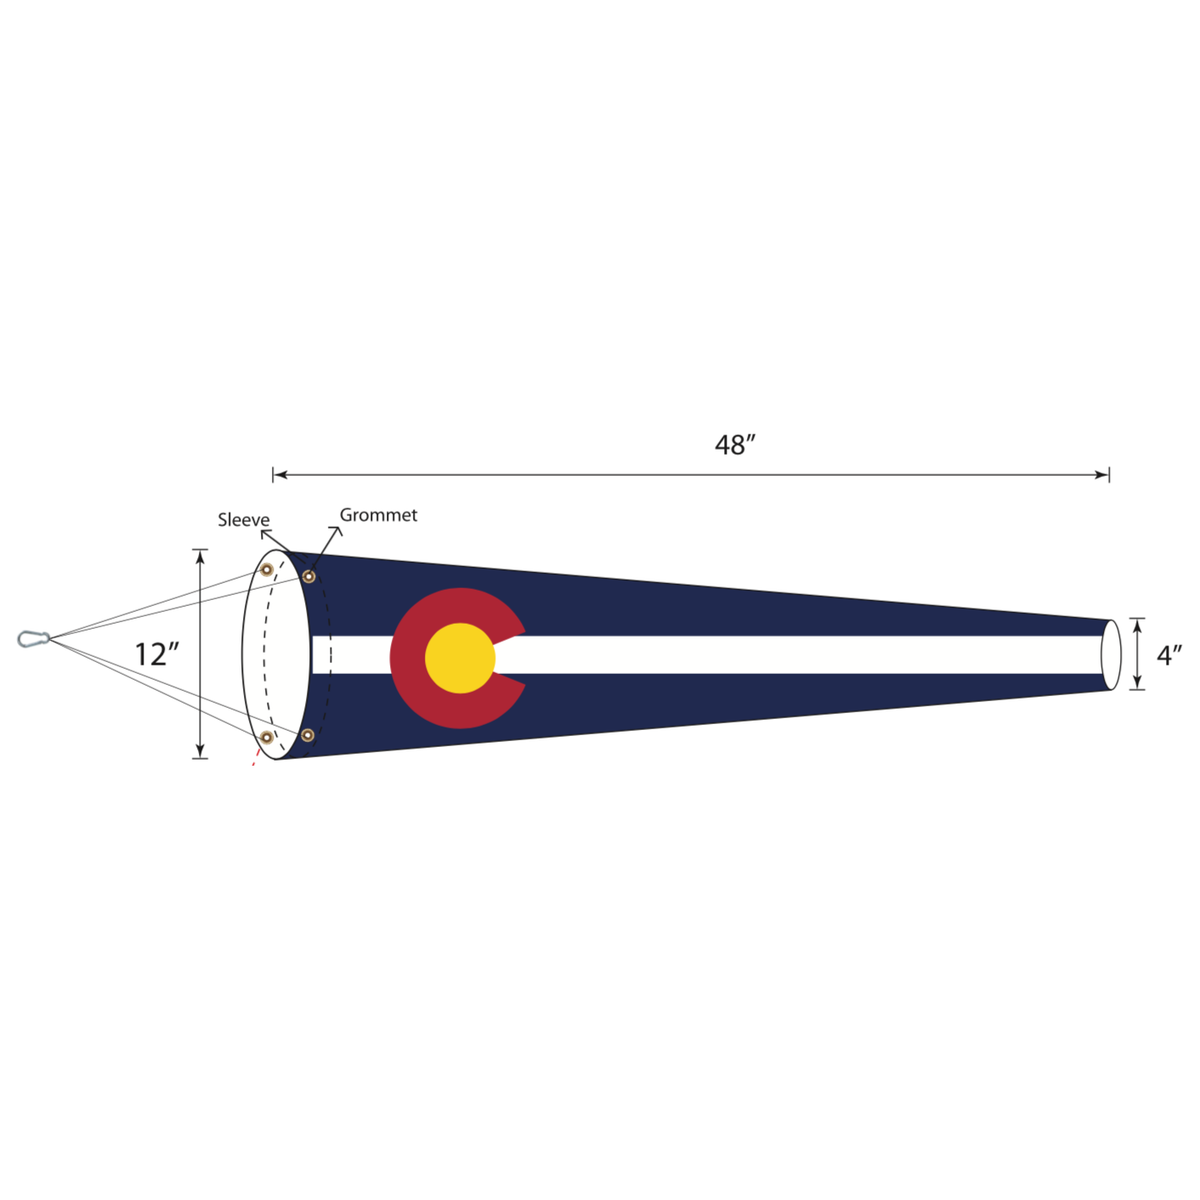 Colorado windsock- Lightweight polyester with plastic ring and heavy duty rope and clips